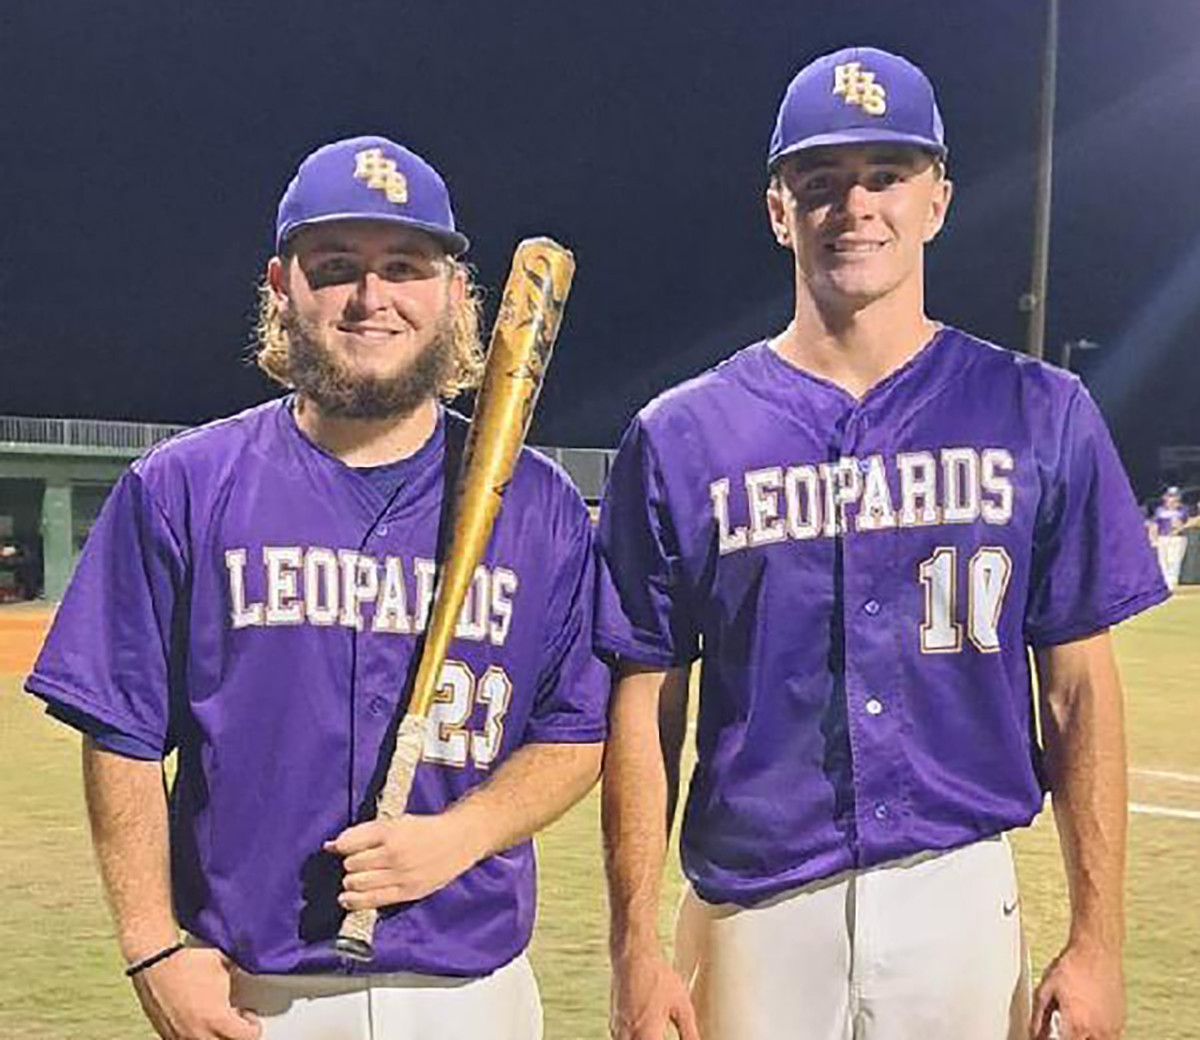 Hernando's Tyson Morgan (left) stroked a two-run single in support of teammate Michael Savarese, who had 17 strikeouts and threw a no-hitter in a 6-0 win against Satellite.